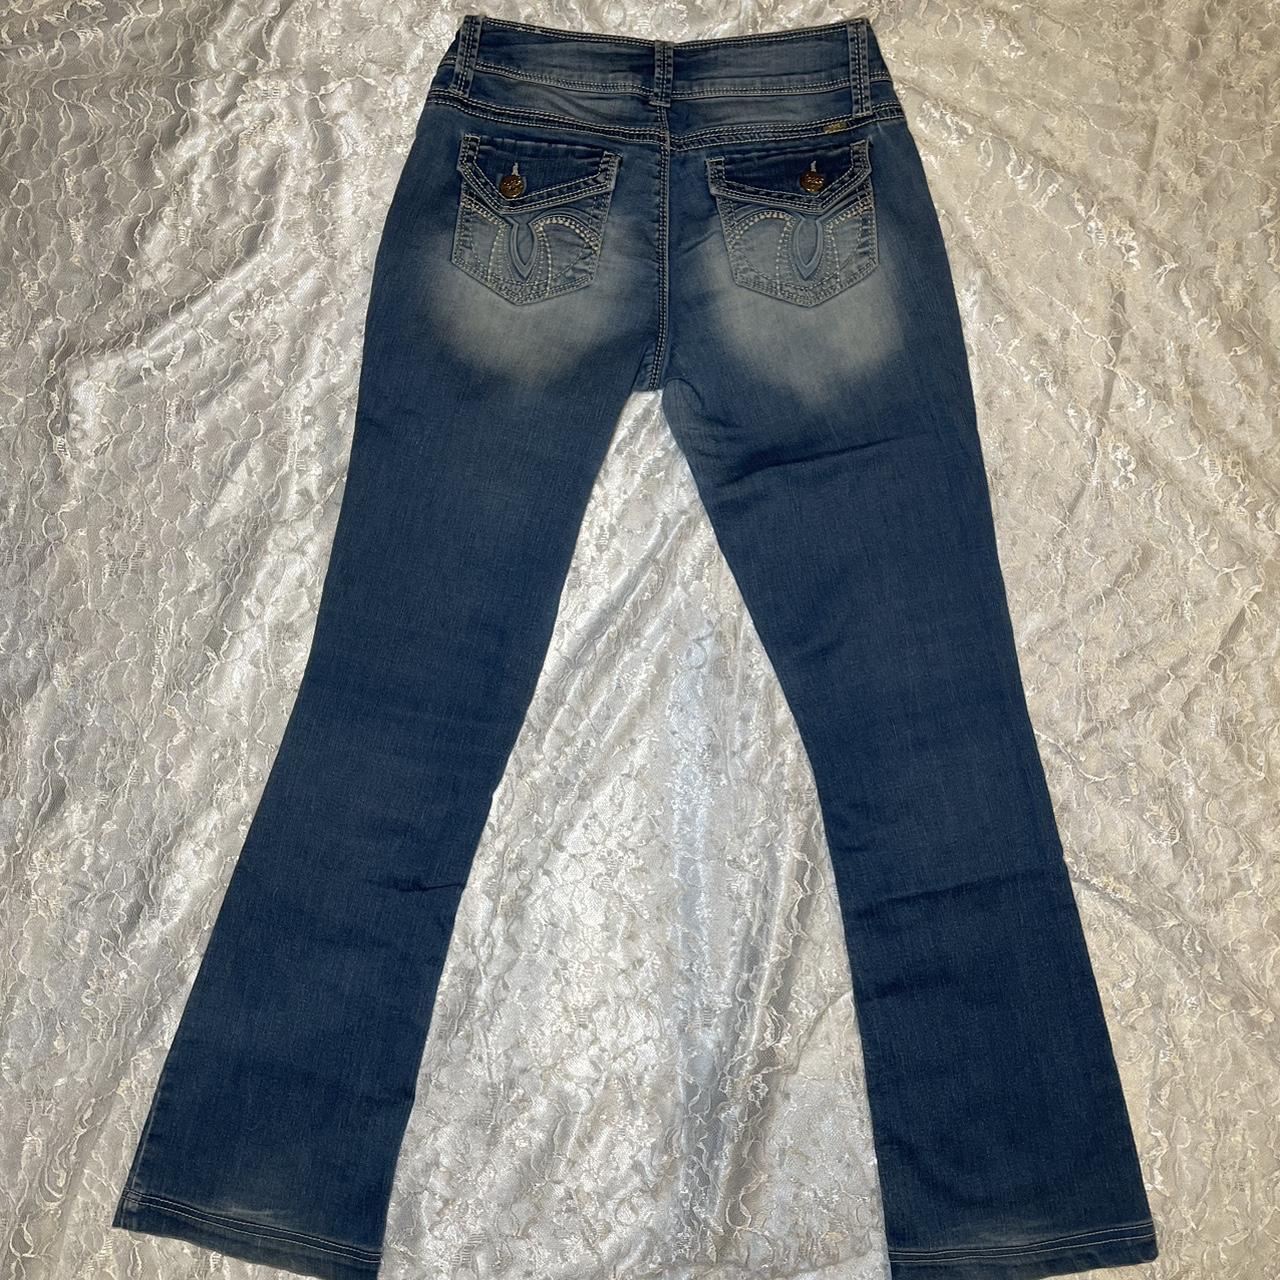 Y2K YMI Jeans Blue Denim Pants 🛸, ⭐️ FREE GIFT WITH